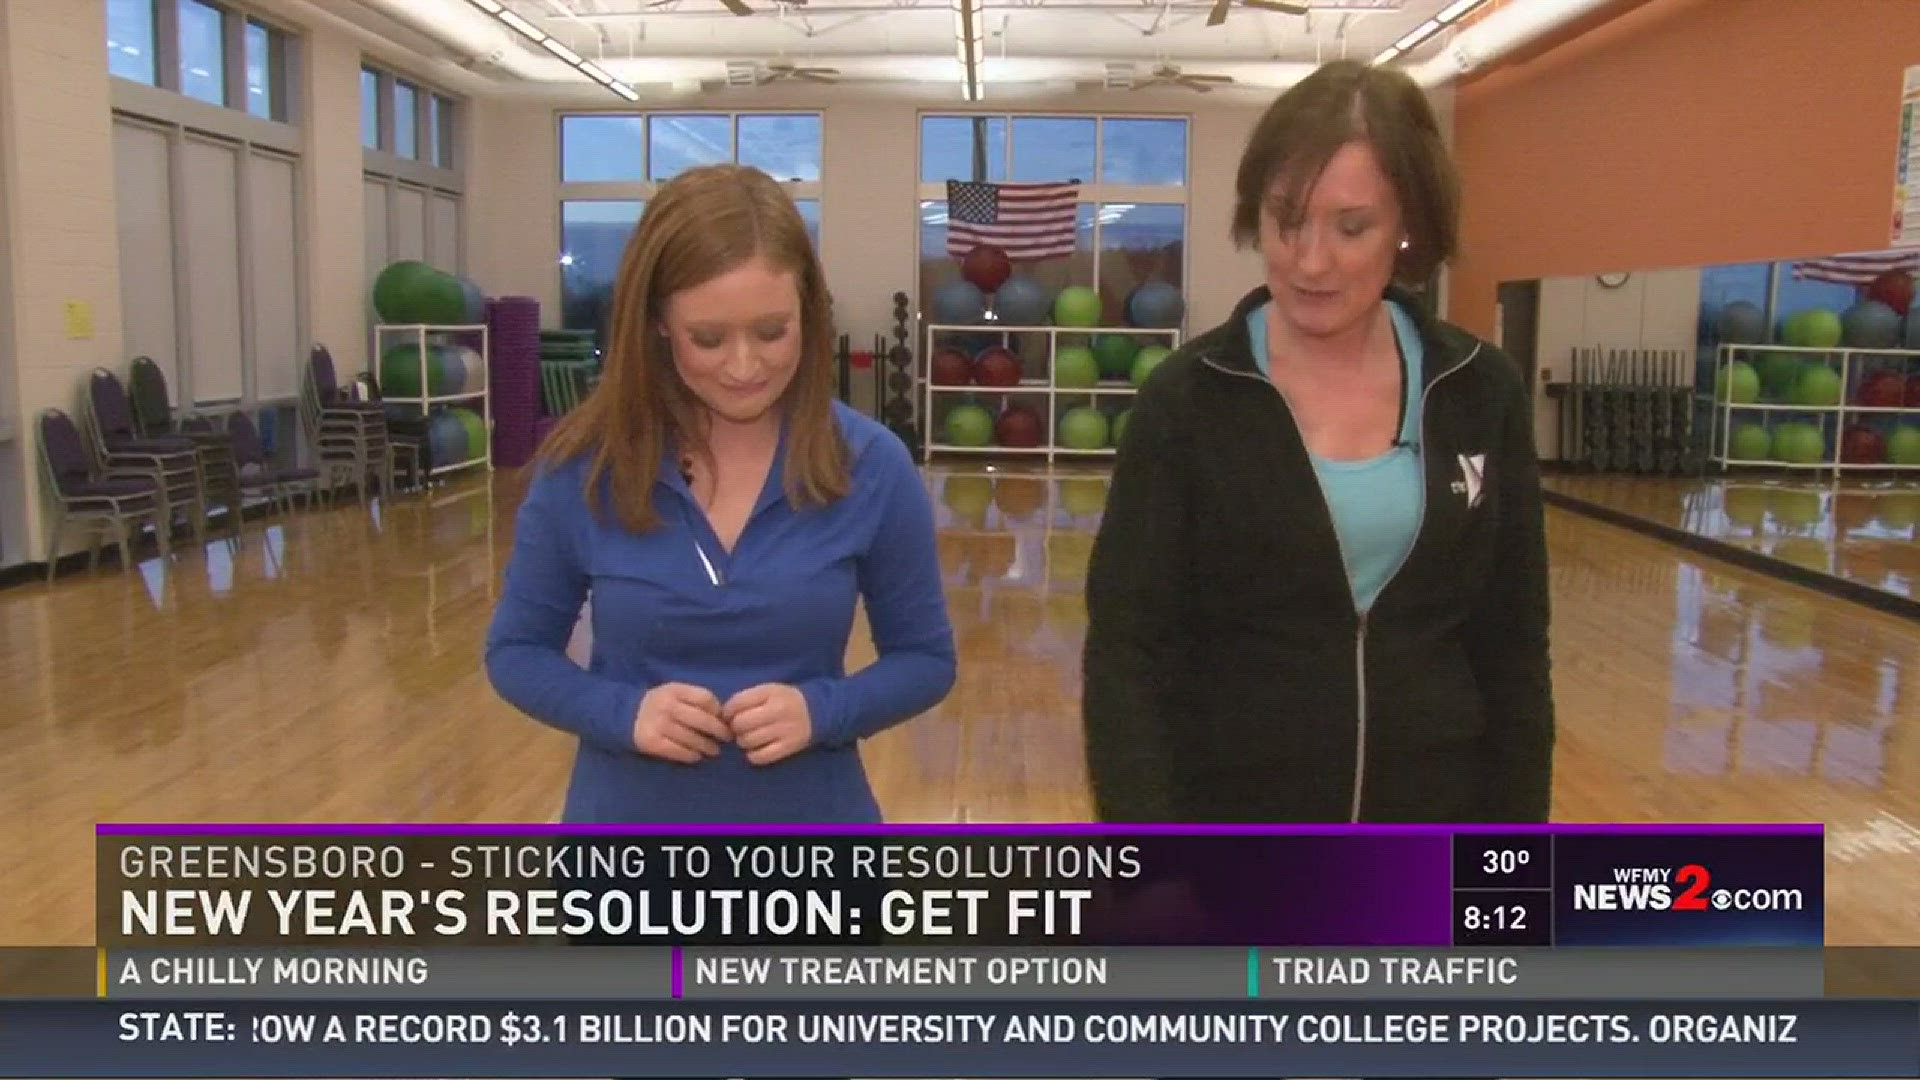 Jessica Mensch went to the YMCA this morning for fun and quick exercises! What is your New Year's resolution?